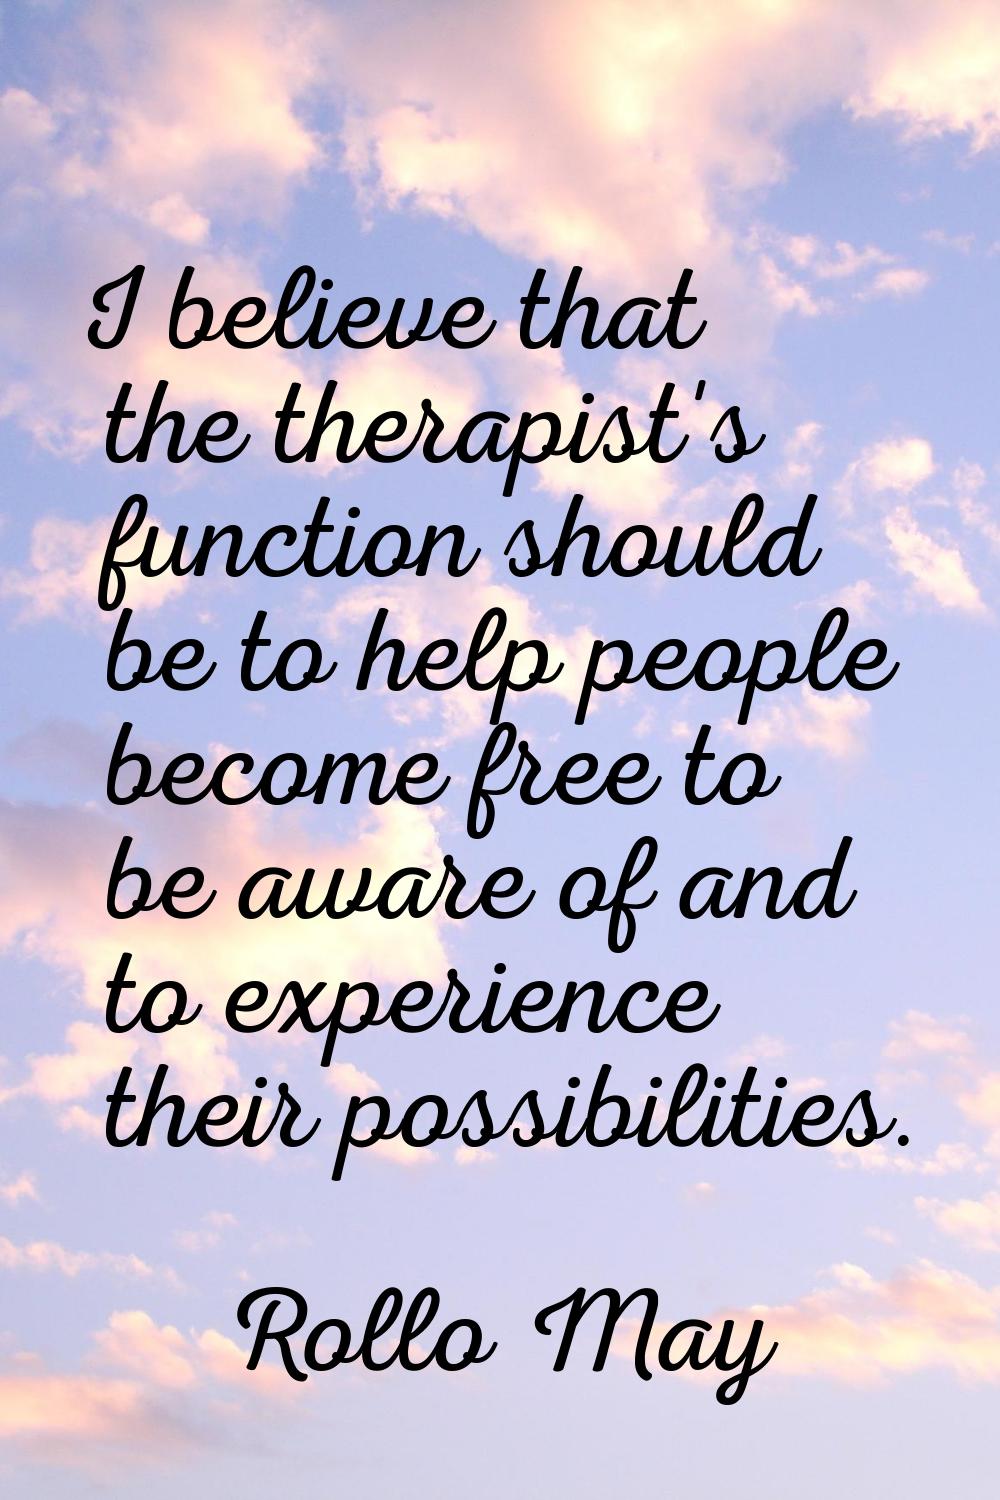 I believe that the therapist's function should be to help people become free to be aware of and to 